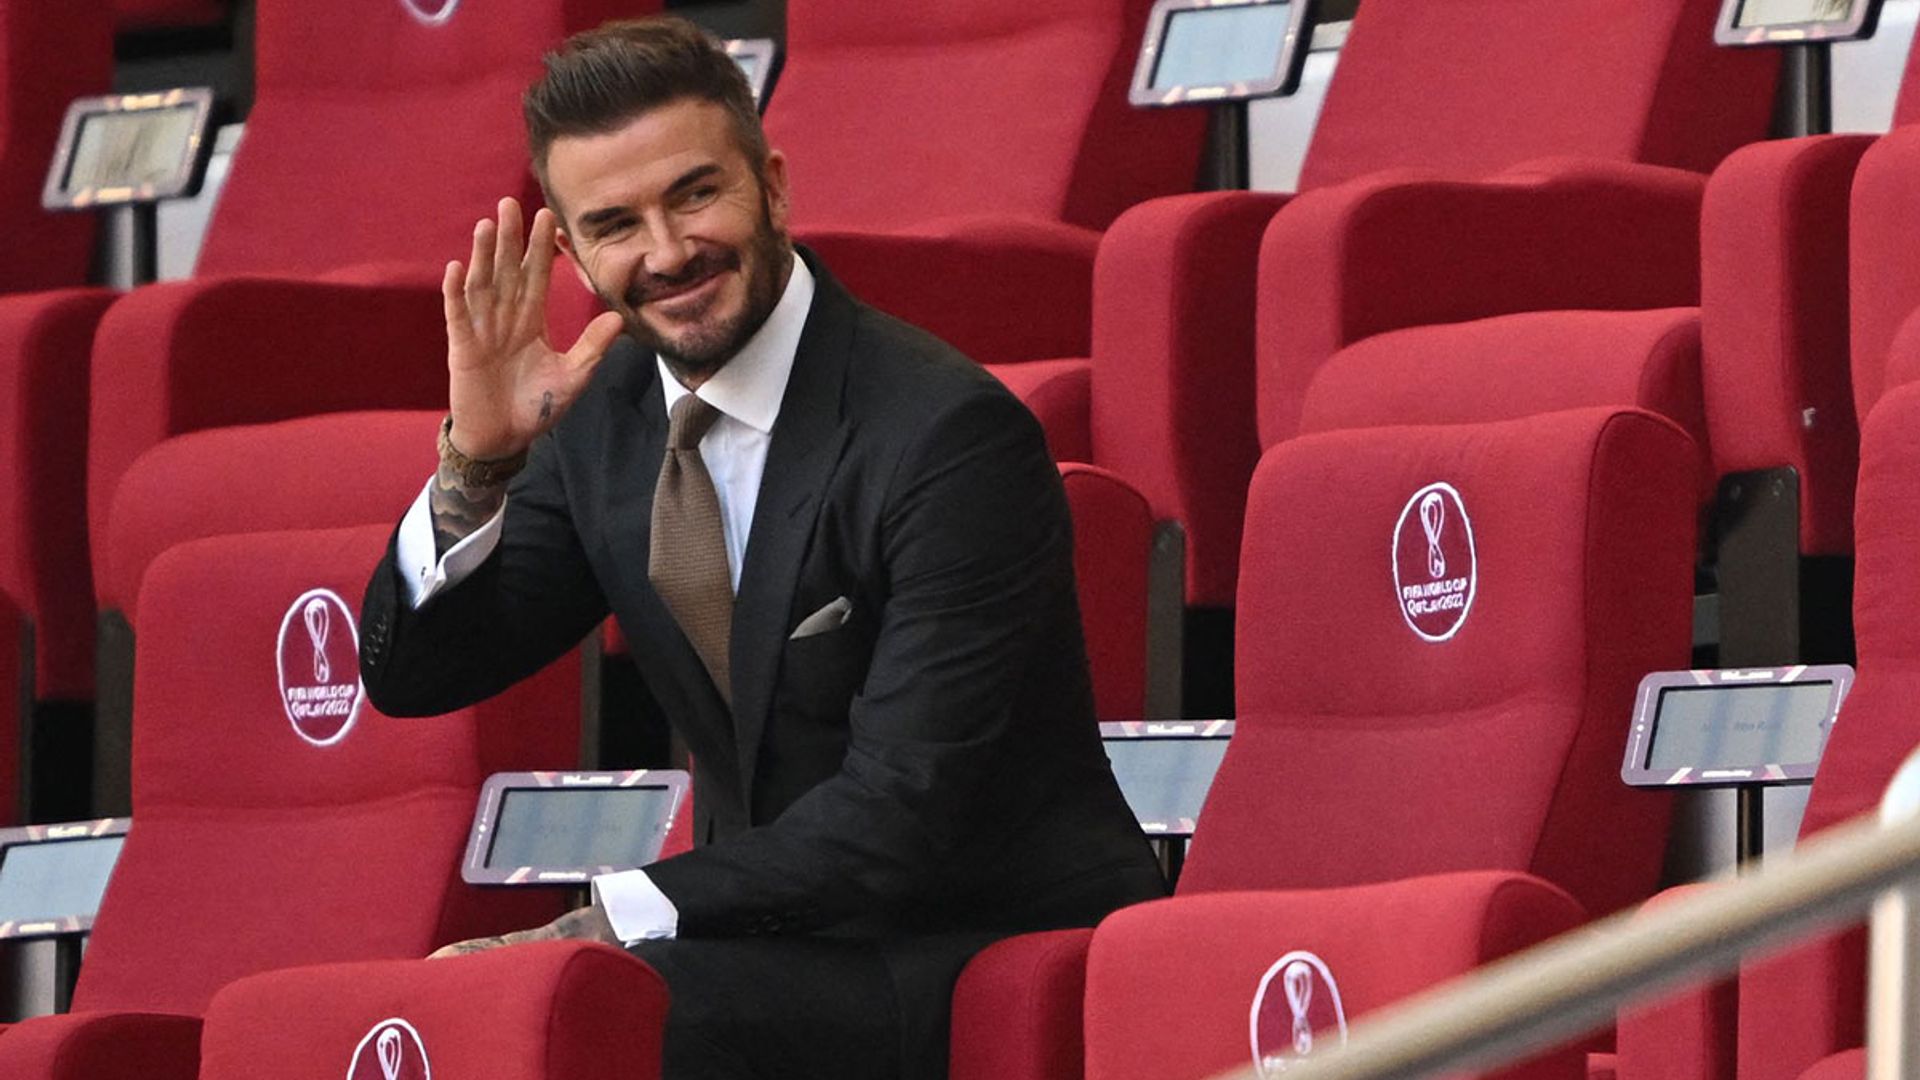 David Beckham supports England team at Qatar World Cup amid controversy